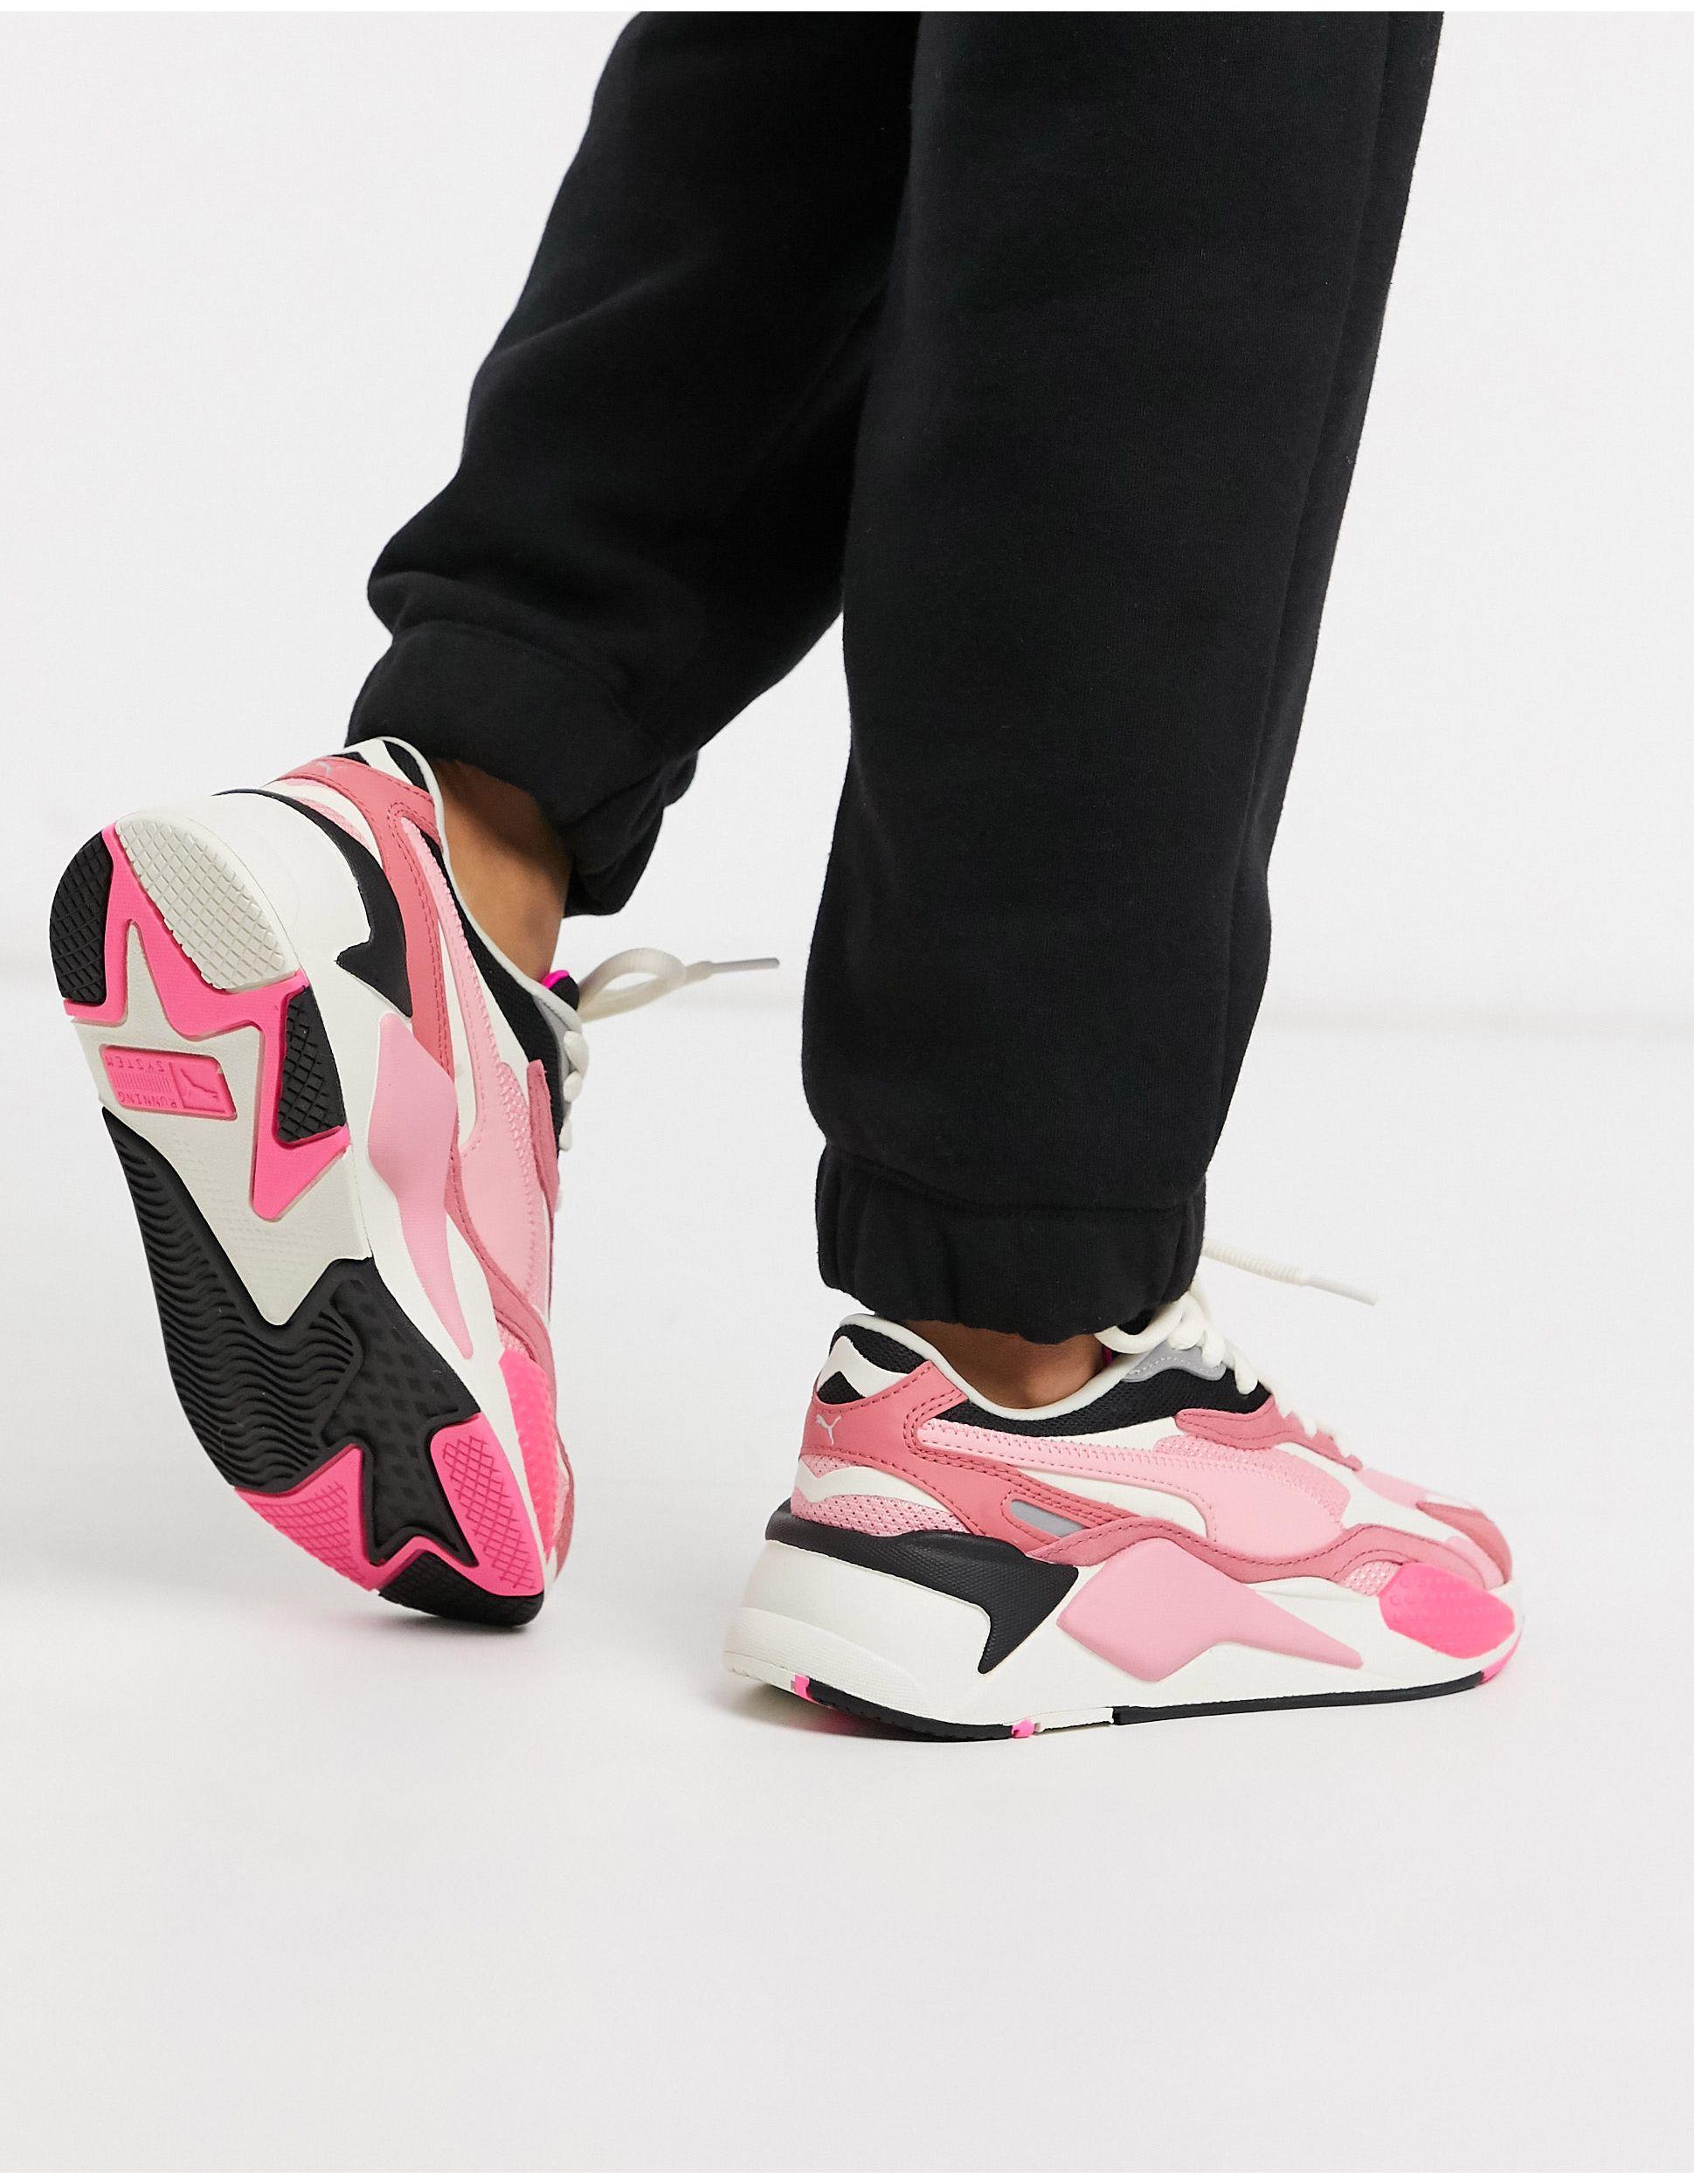 PUMA Leather Rs-x Cubed in Rose-Pink (Pink) - Lyst